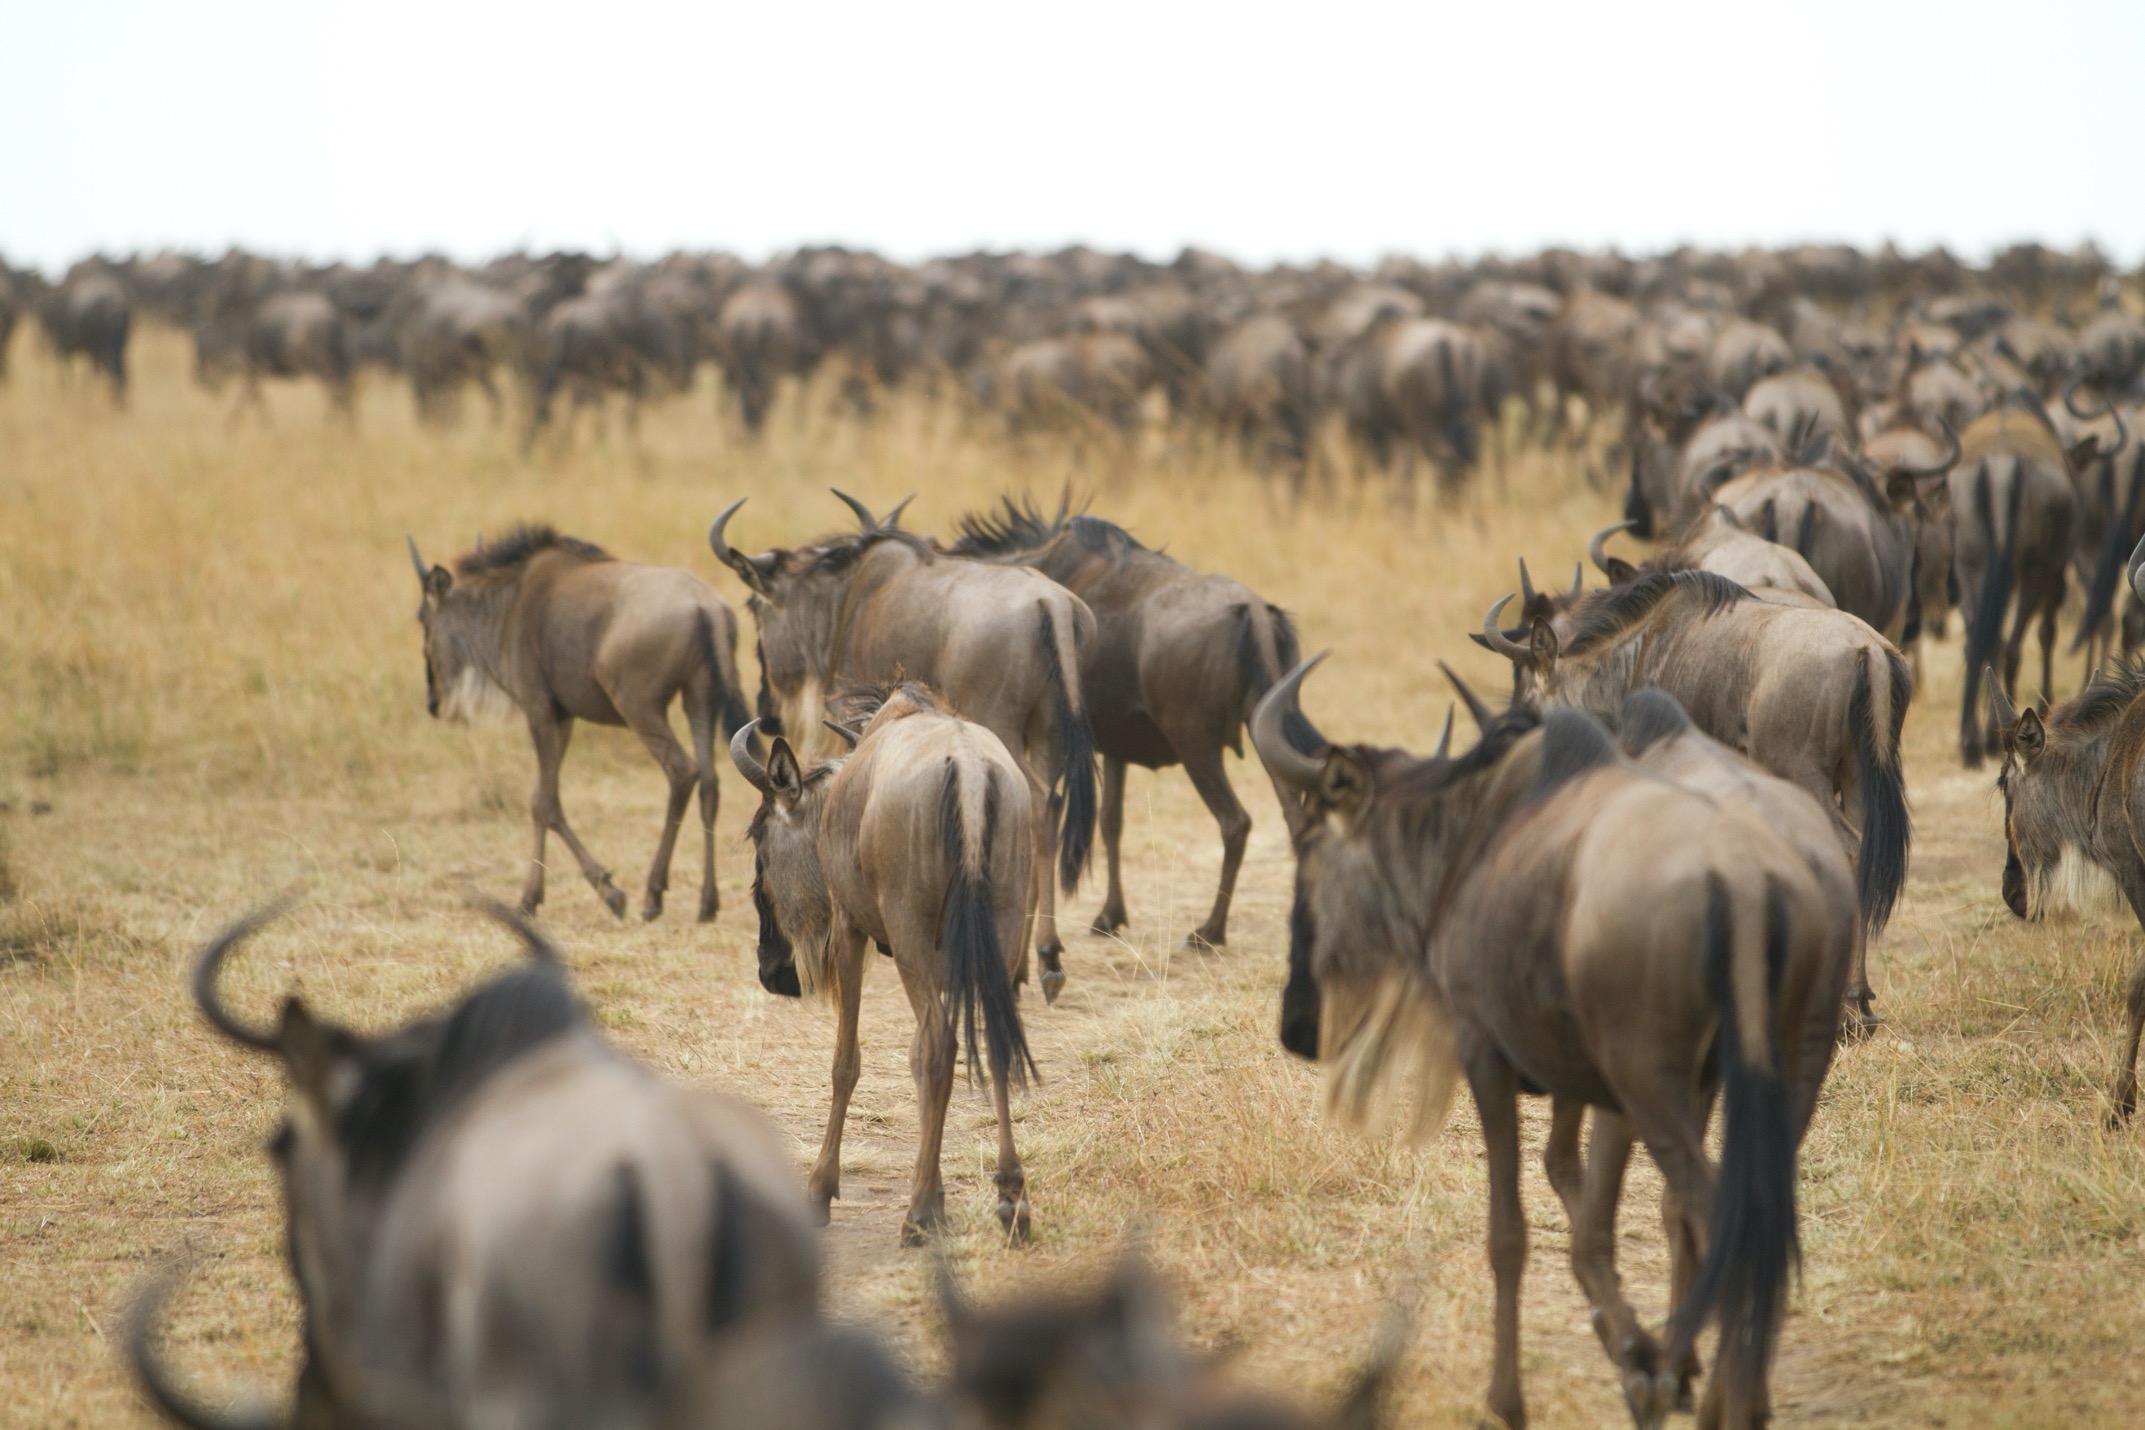 wildebeest walk away from the camera as herds pack the horizon